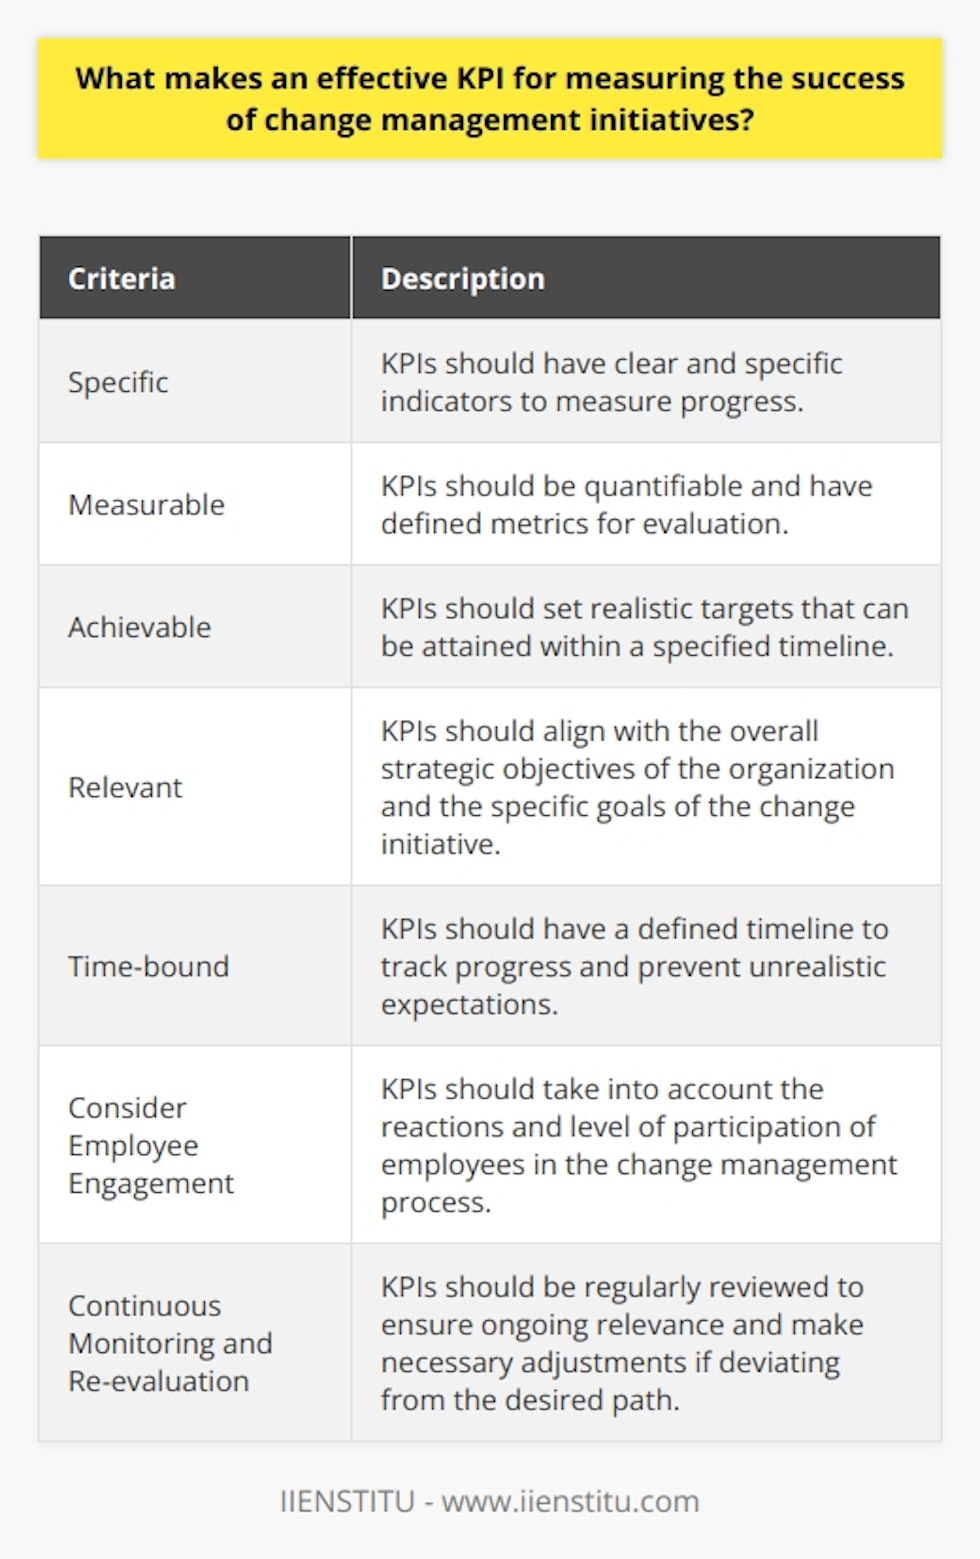 KPIs (Key Performance Indicators) play a significant role in measuring the success of change management initiatives. However, determining effective KPIs can be challenging. To ensure effectiveness, KPIs must adhere to the SMART criteria: Specific, Measurable, Achievable, Relevant, and Time-bound.Specific and measurable KPIs are crucial. It is important to avoid using broad or vague indicators that lack clear direction and evaluation metrics. Instead, KPIs should directly relate to the objectives of the change initiative, providing a concrete measurement of progress.Furthermore, effective KPIs must be achievable and time-bound. Setting targets that are attainable within a specified timeline helps prevent setting unrealistic expectations. This approach promotes a more realistic and practical approach to achieving success in change management initiatives.Relevance is also key when selecting KPIs. Each KPI should align with the overarching strategic objectives of the organization and reflect the specific goals of the change management initiative. This ensures that the initiative not only meets set goals but also contributes to the overall business strategy.Employee engagement should also be considered when devising effective KPIs. Analyzing employees' reactions to change and their level of participation provides valuable insights. If the workforce fully embraces the change, it may indicate a successful implementation of change management.In addition, continual monitoring and re-evaluation of KPIs are necessary. Regular reviews allow for adjustments when necessary, ensuring ongoing relevance and consistent progress towards goals. This systematic monitoring helps the organization keep track of its movement and make necessary adjustments if it deviates from the desired path.In conclusion, effective KPIs for measuring the success of change management initiatives are specific, measurable, achievable, relevant, and time-bound. They align with organizational strategy, reflect measurable and attainable goals, consider employee engagement, and undergo continuous monitoring and re-evaluation. By adhering to these principles, organizations can effectively measure the success of their change management efforts and make necessary adjustments to achieve desired outcomes.